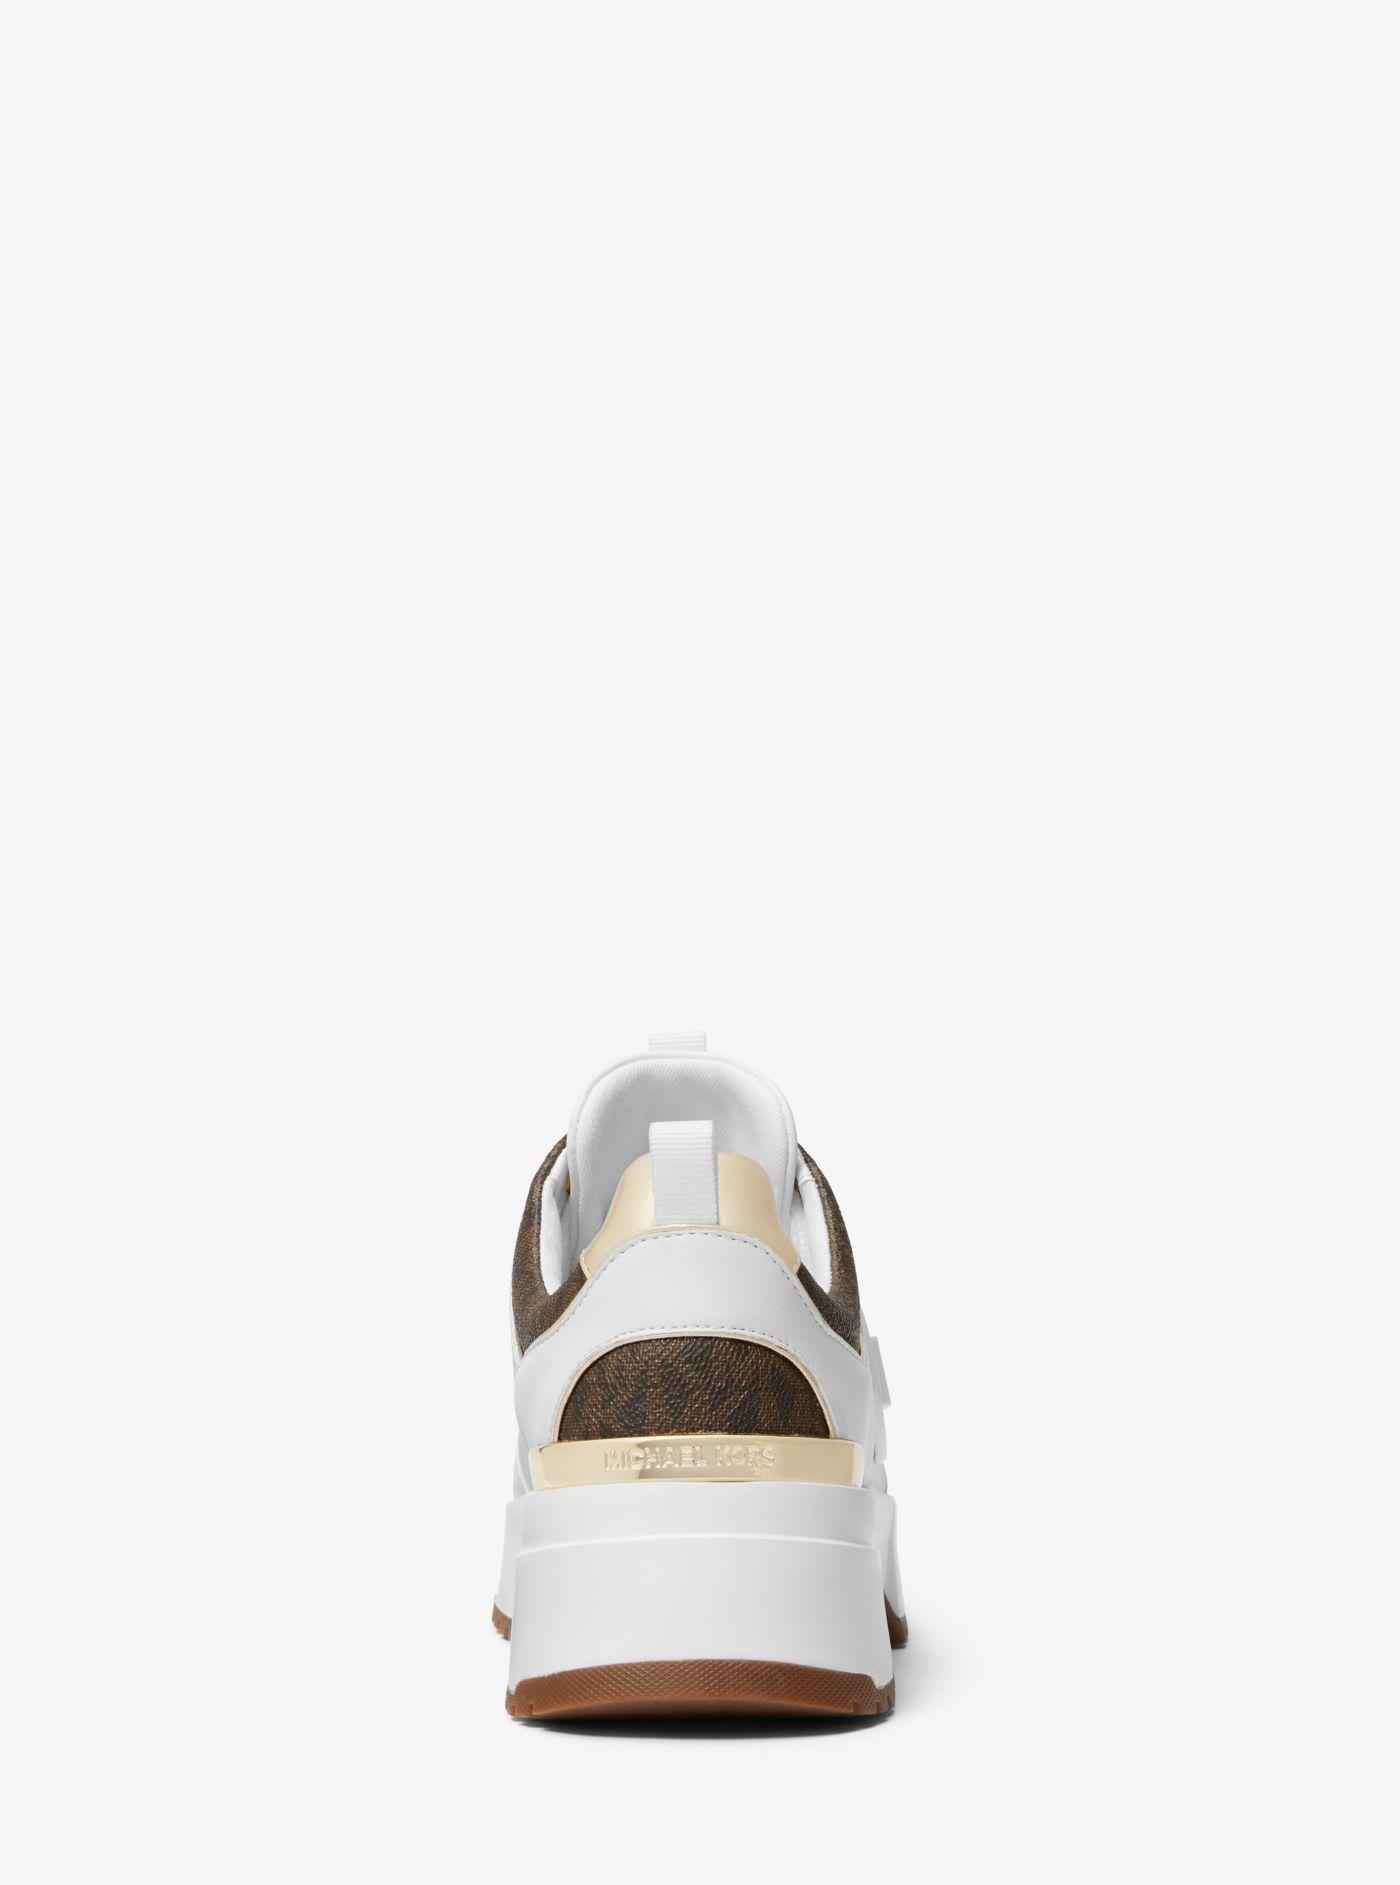 Michael Kors Cosmo Logo And Faux Leather Trainer in White | Lyst